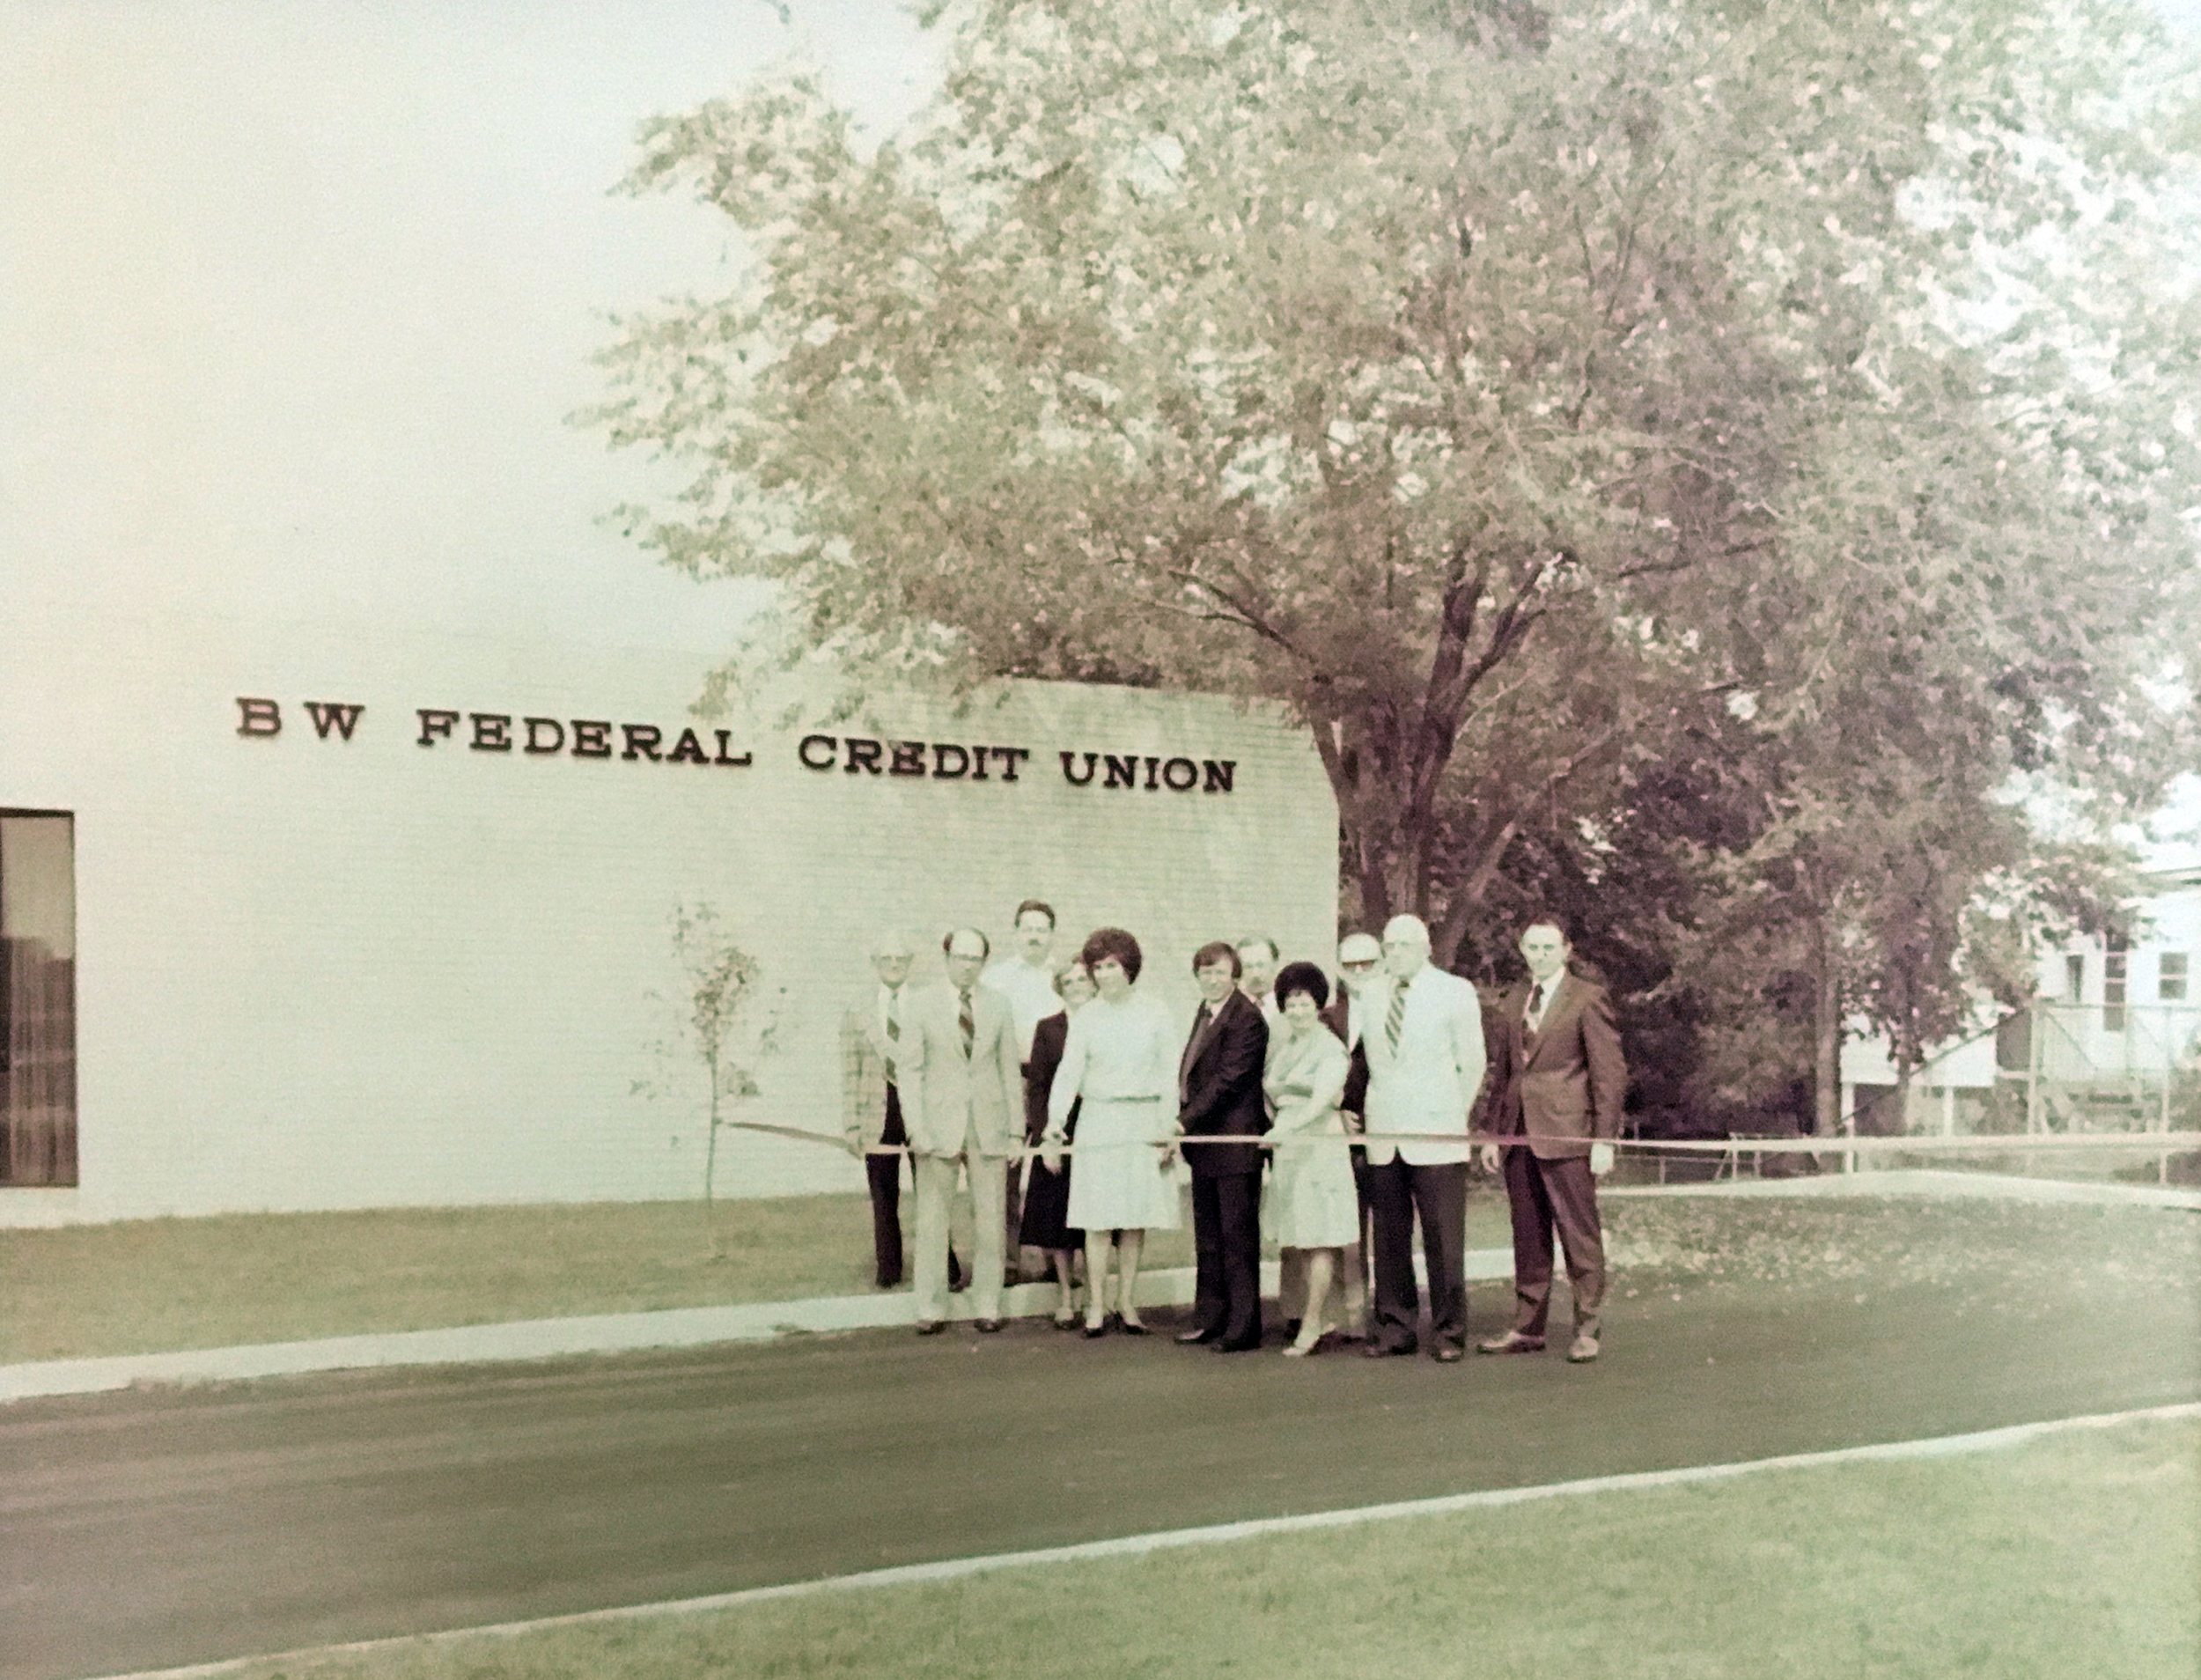 Image: Old photo of a ribbon cutting at BWFCU